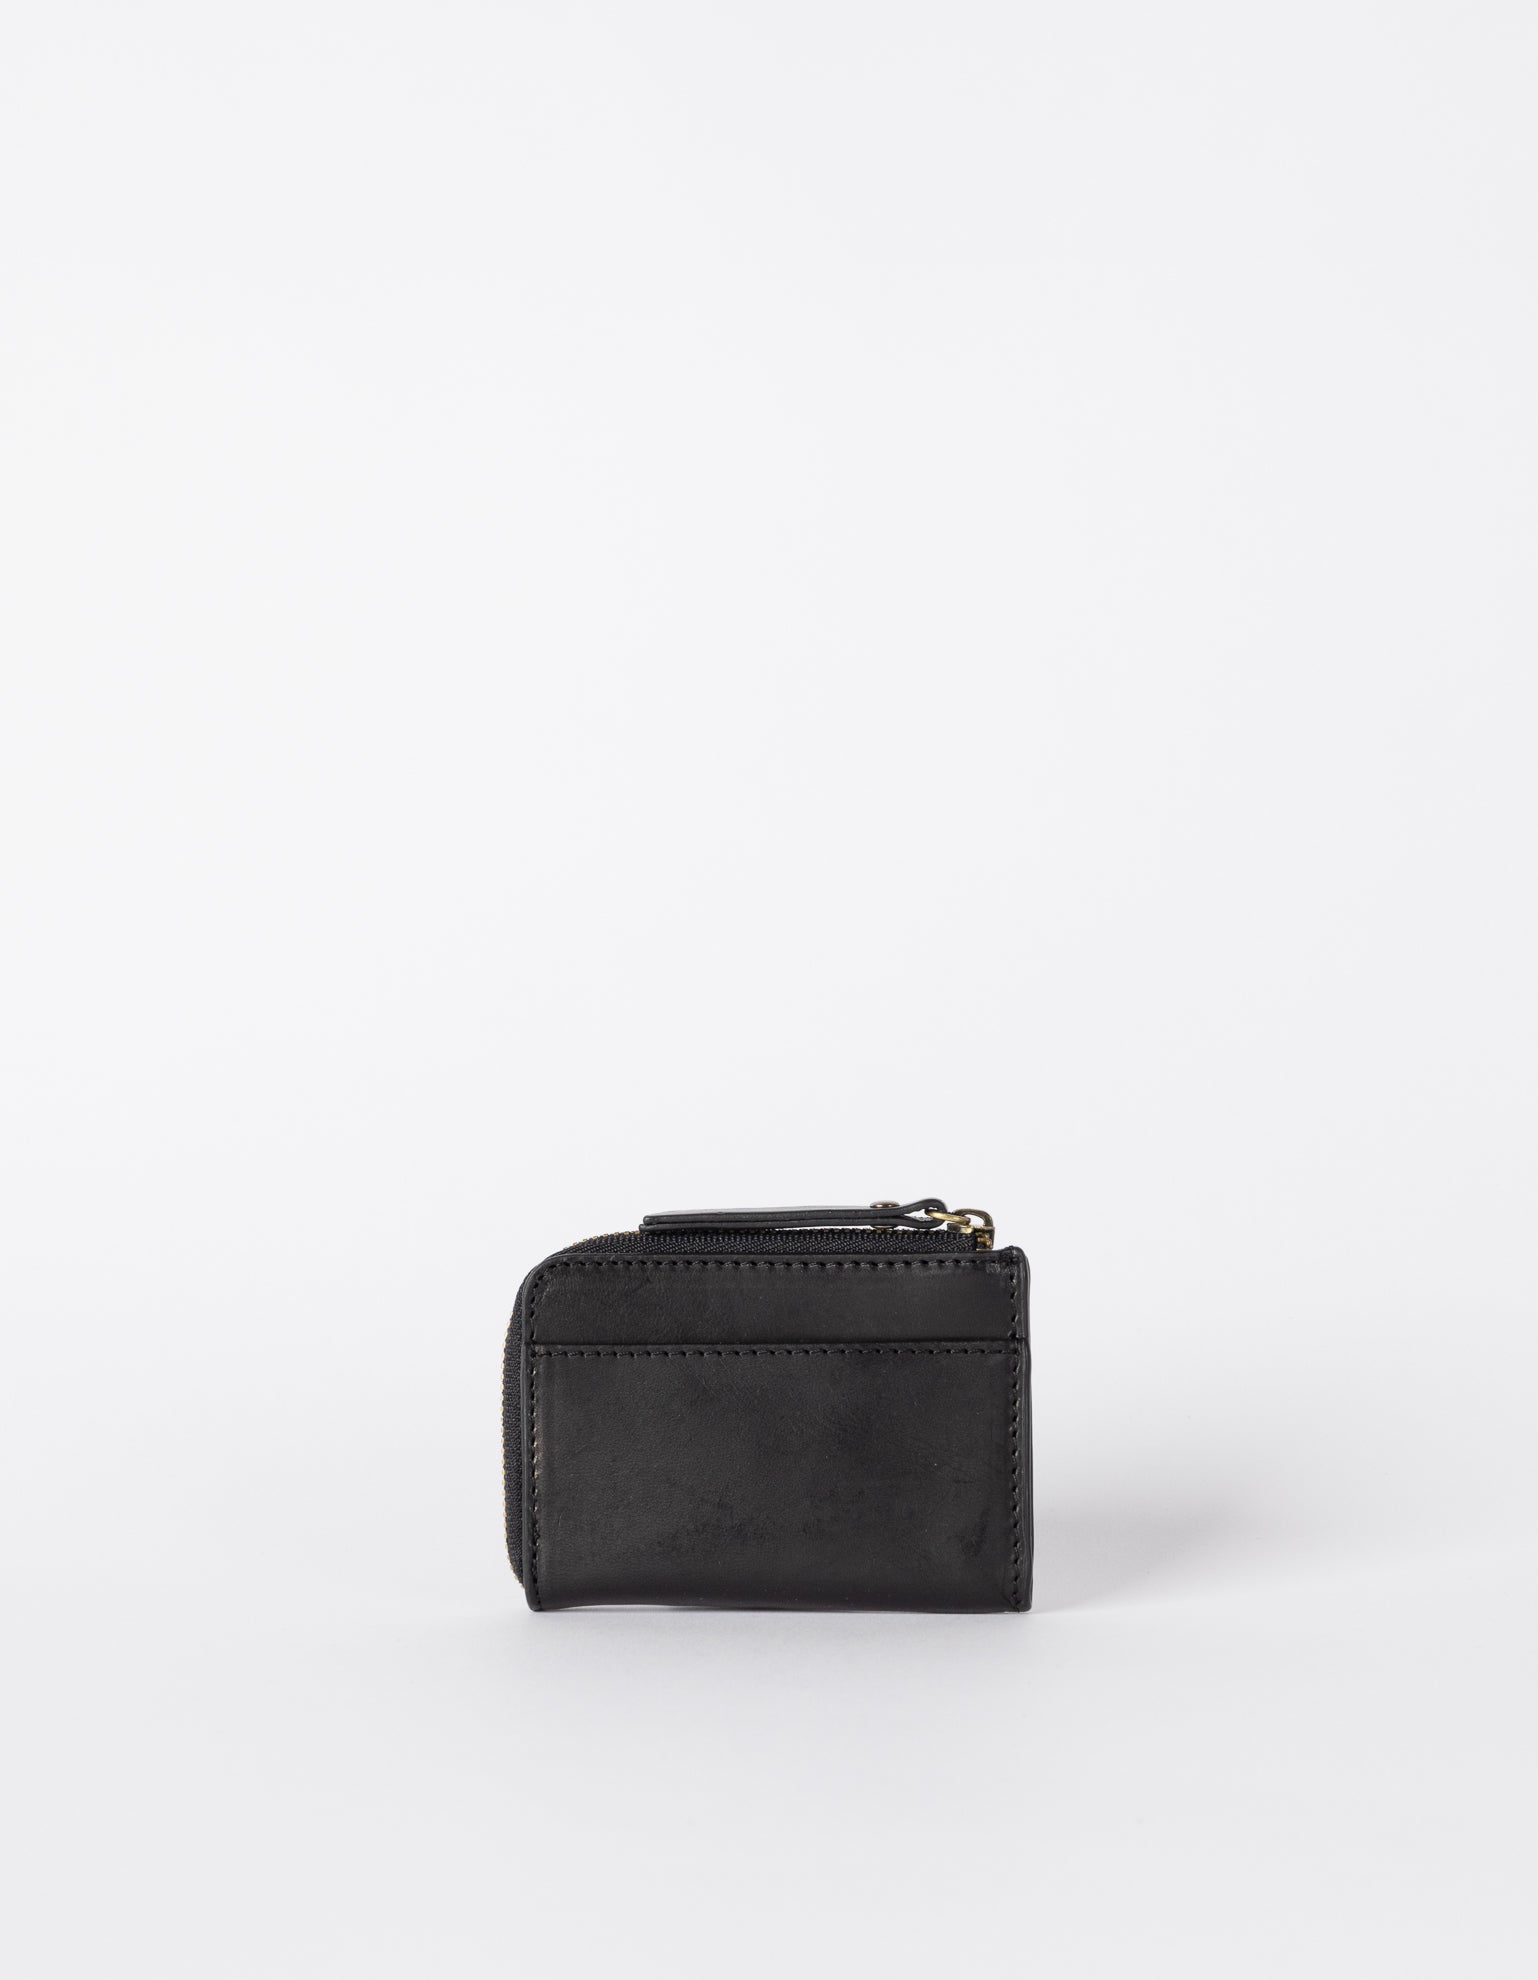 Coco Coin Purse Black Classic Leather. Square shape. Back product image